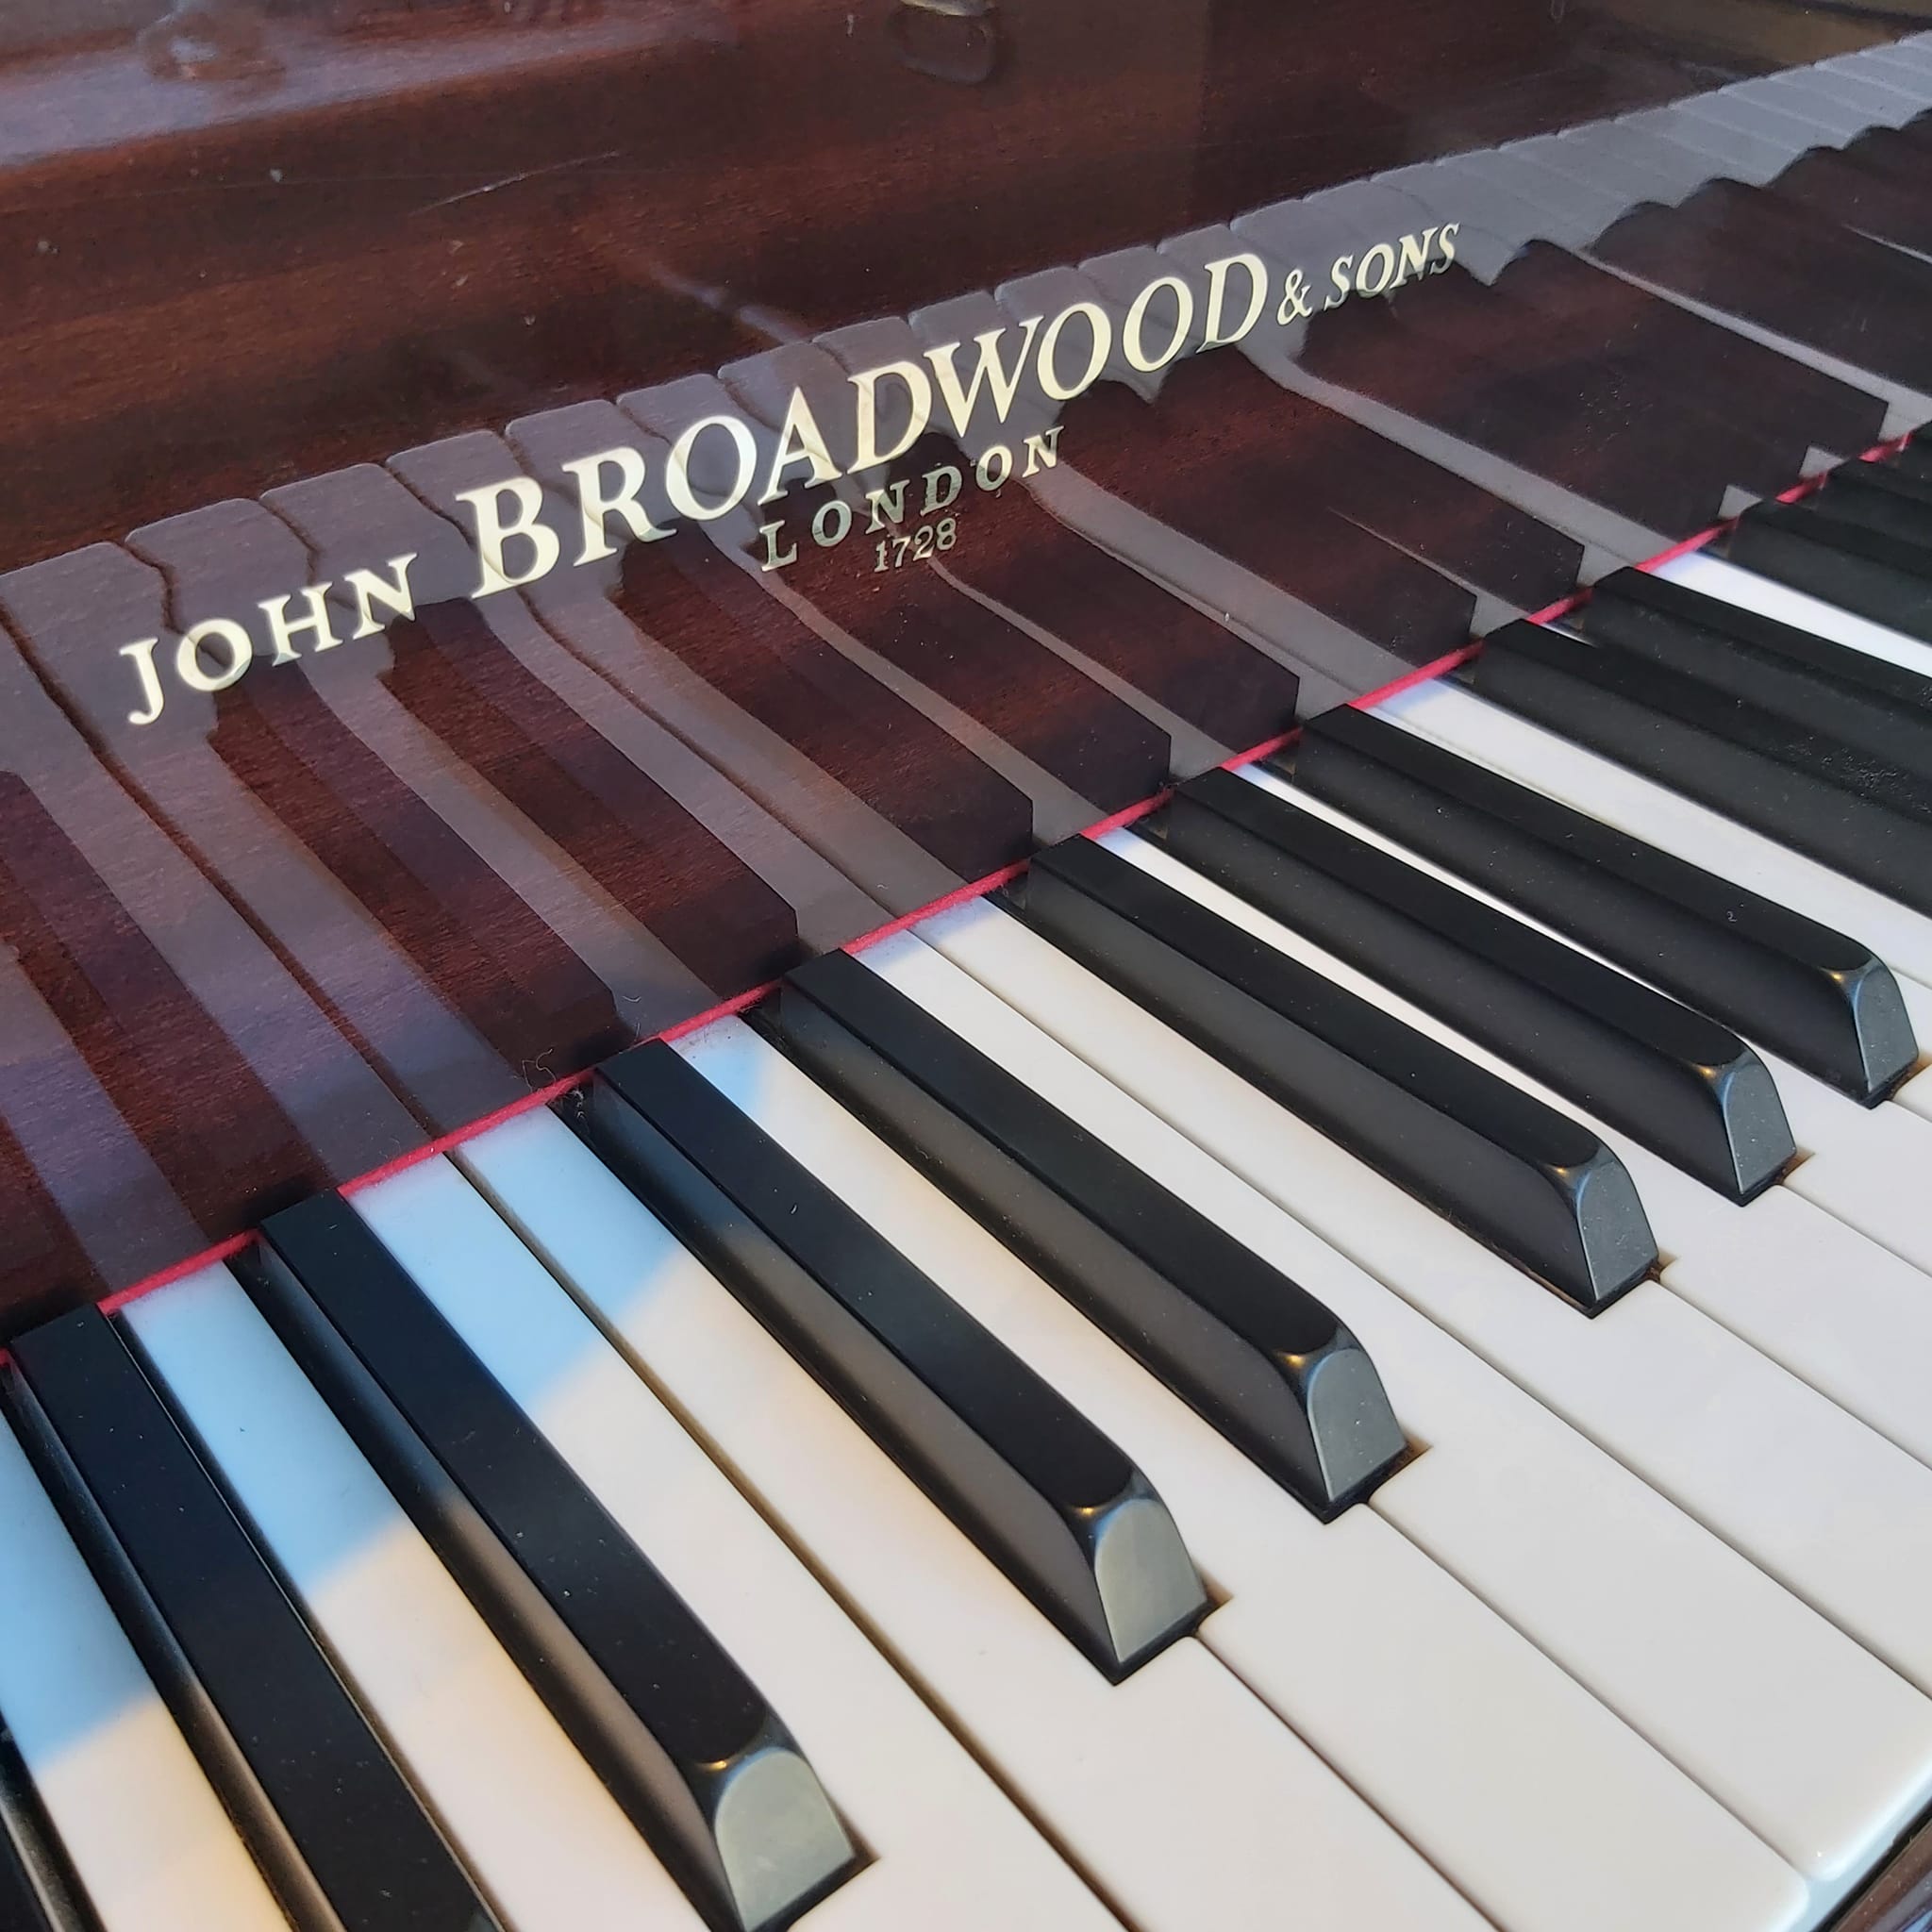 Acoustic grand and upright pianos for sale